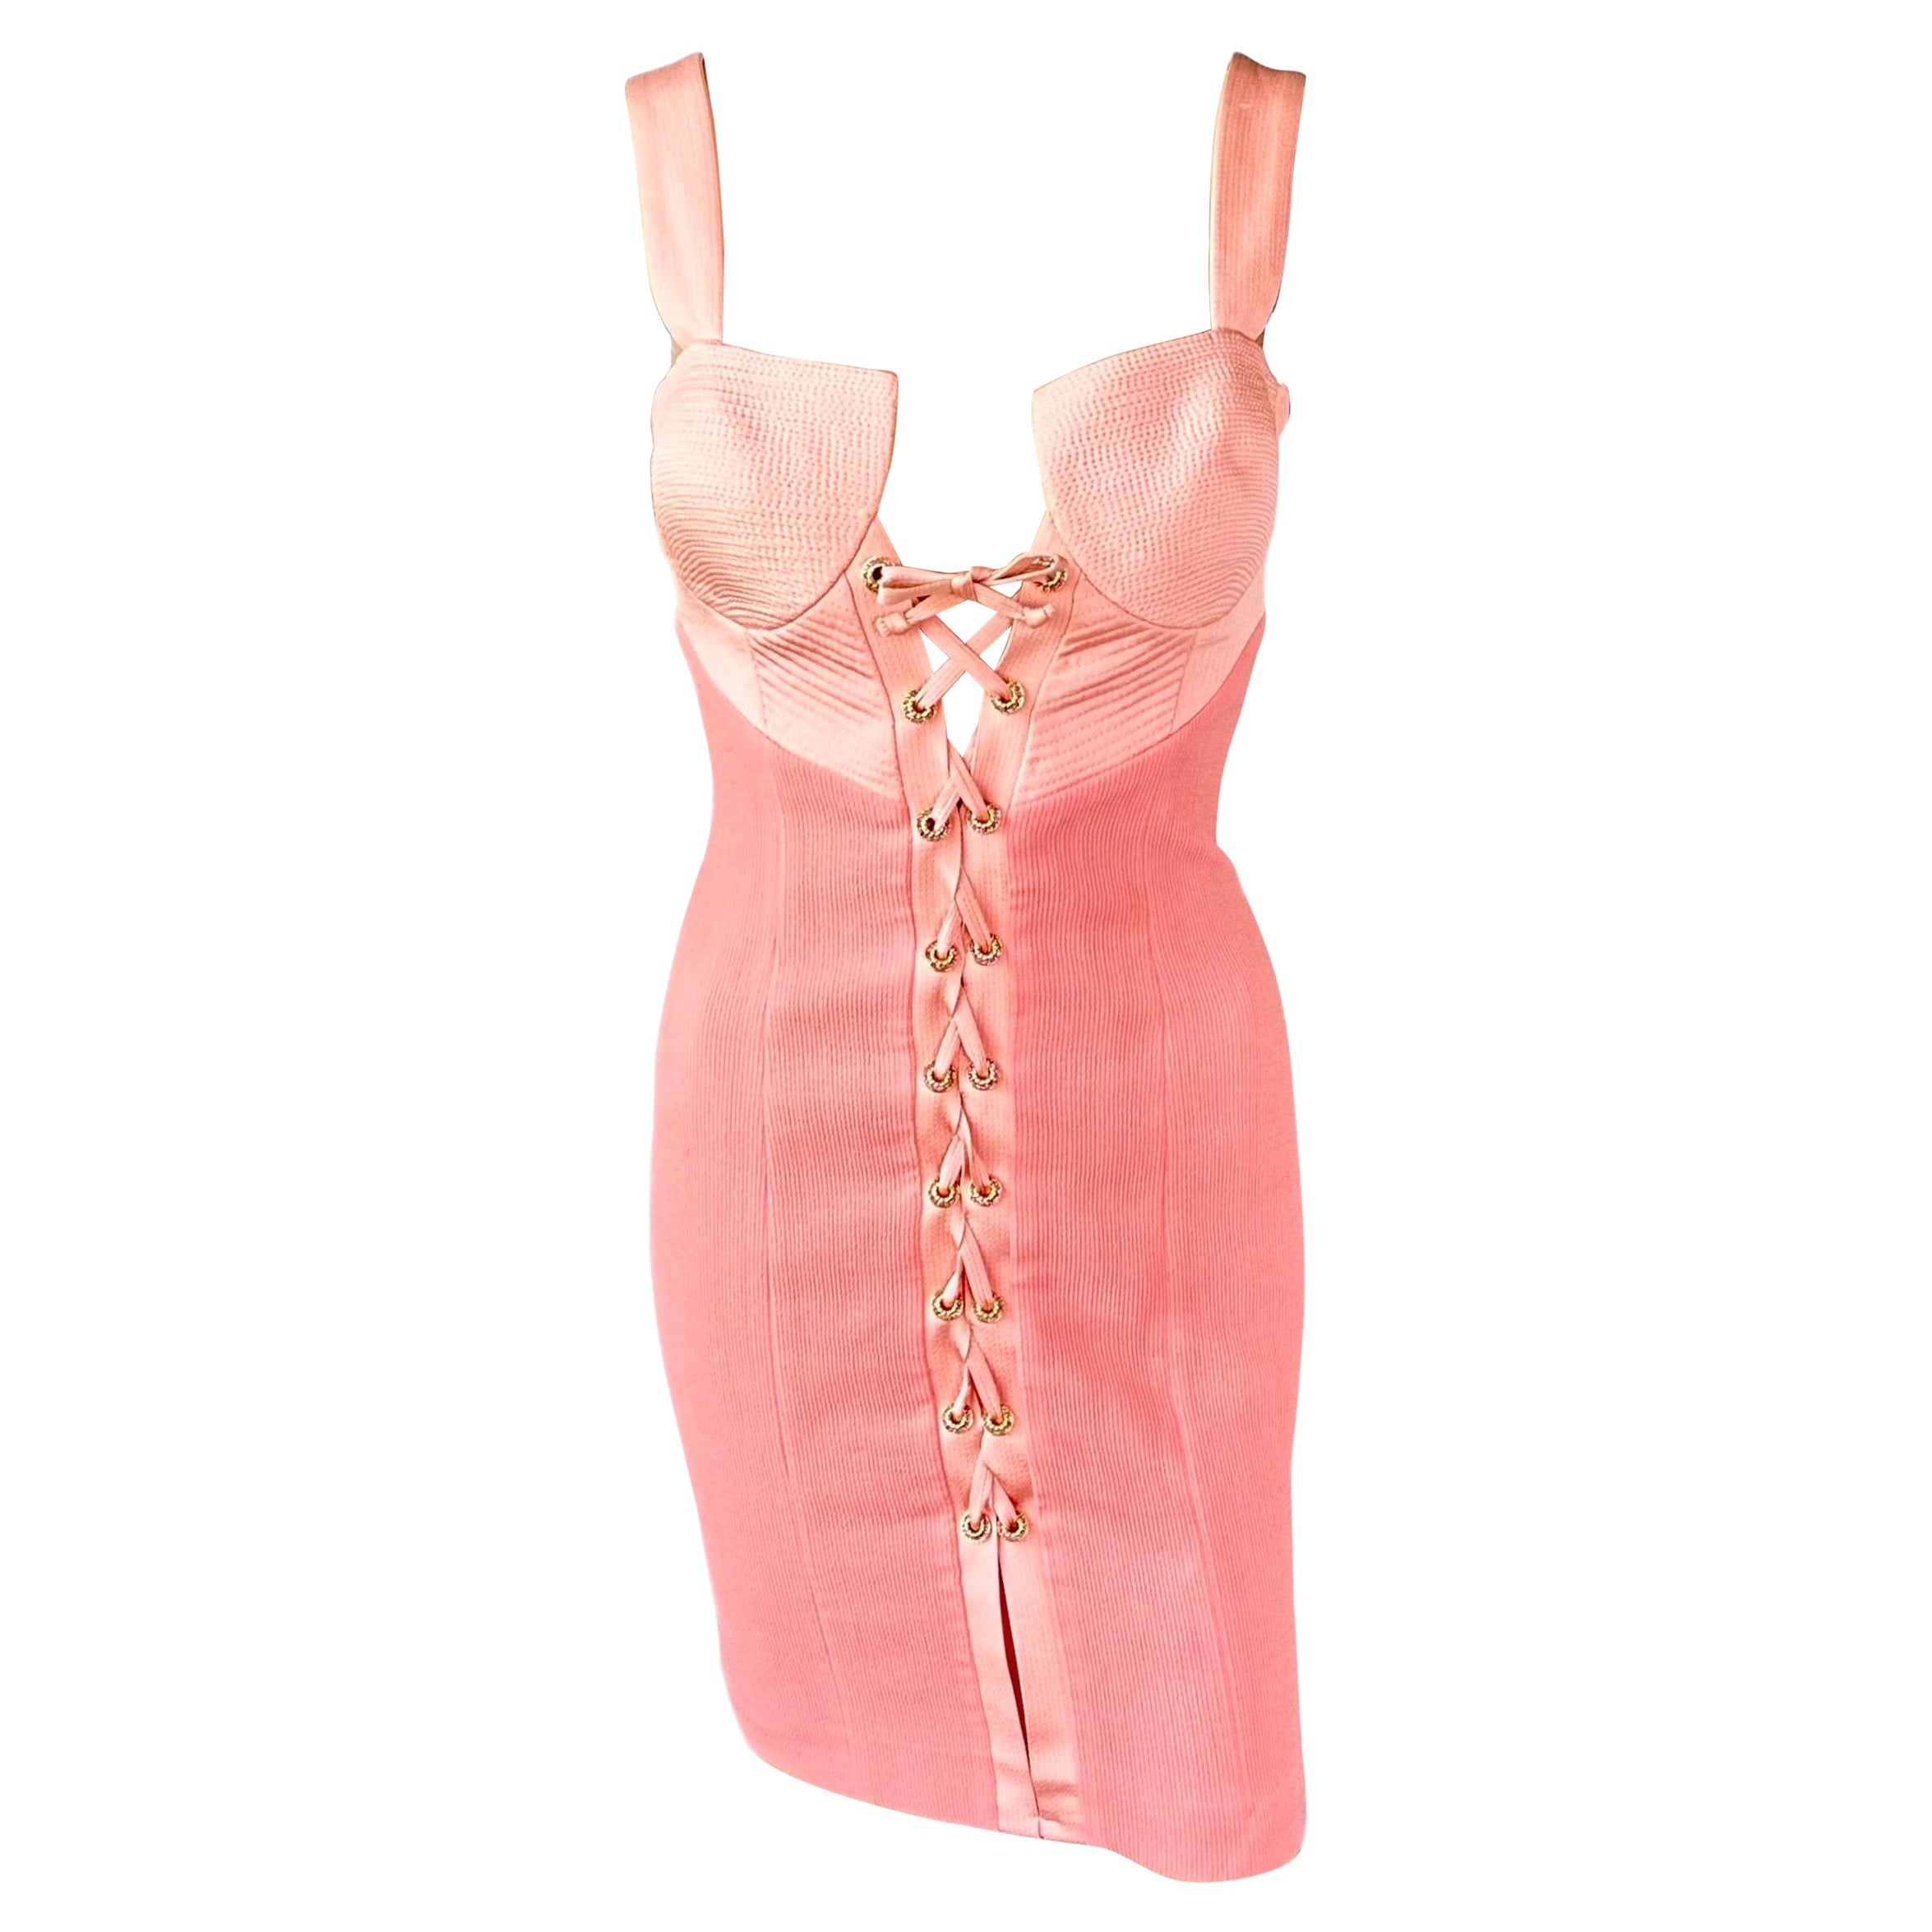 Gianni Versace S/S 1992 Couture Bustier Corset Lace Up Mini Dress For Sale